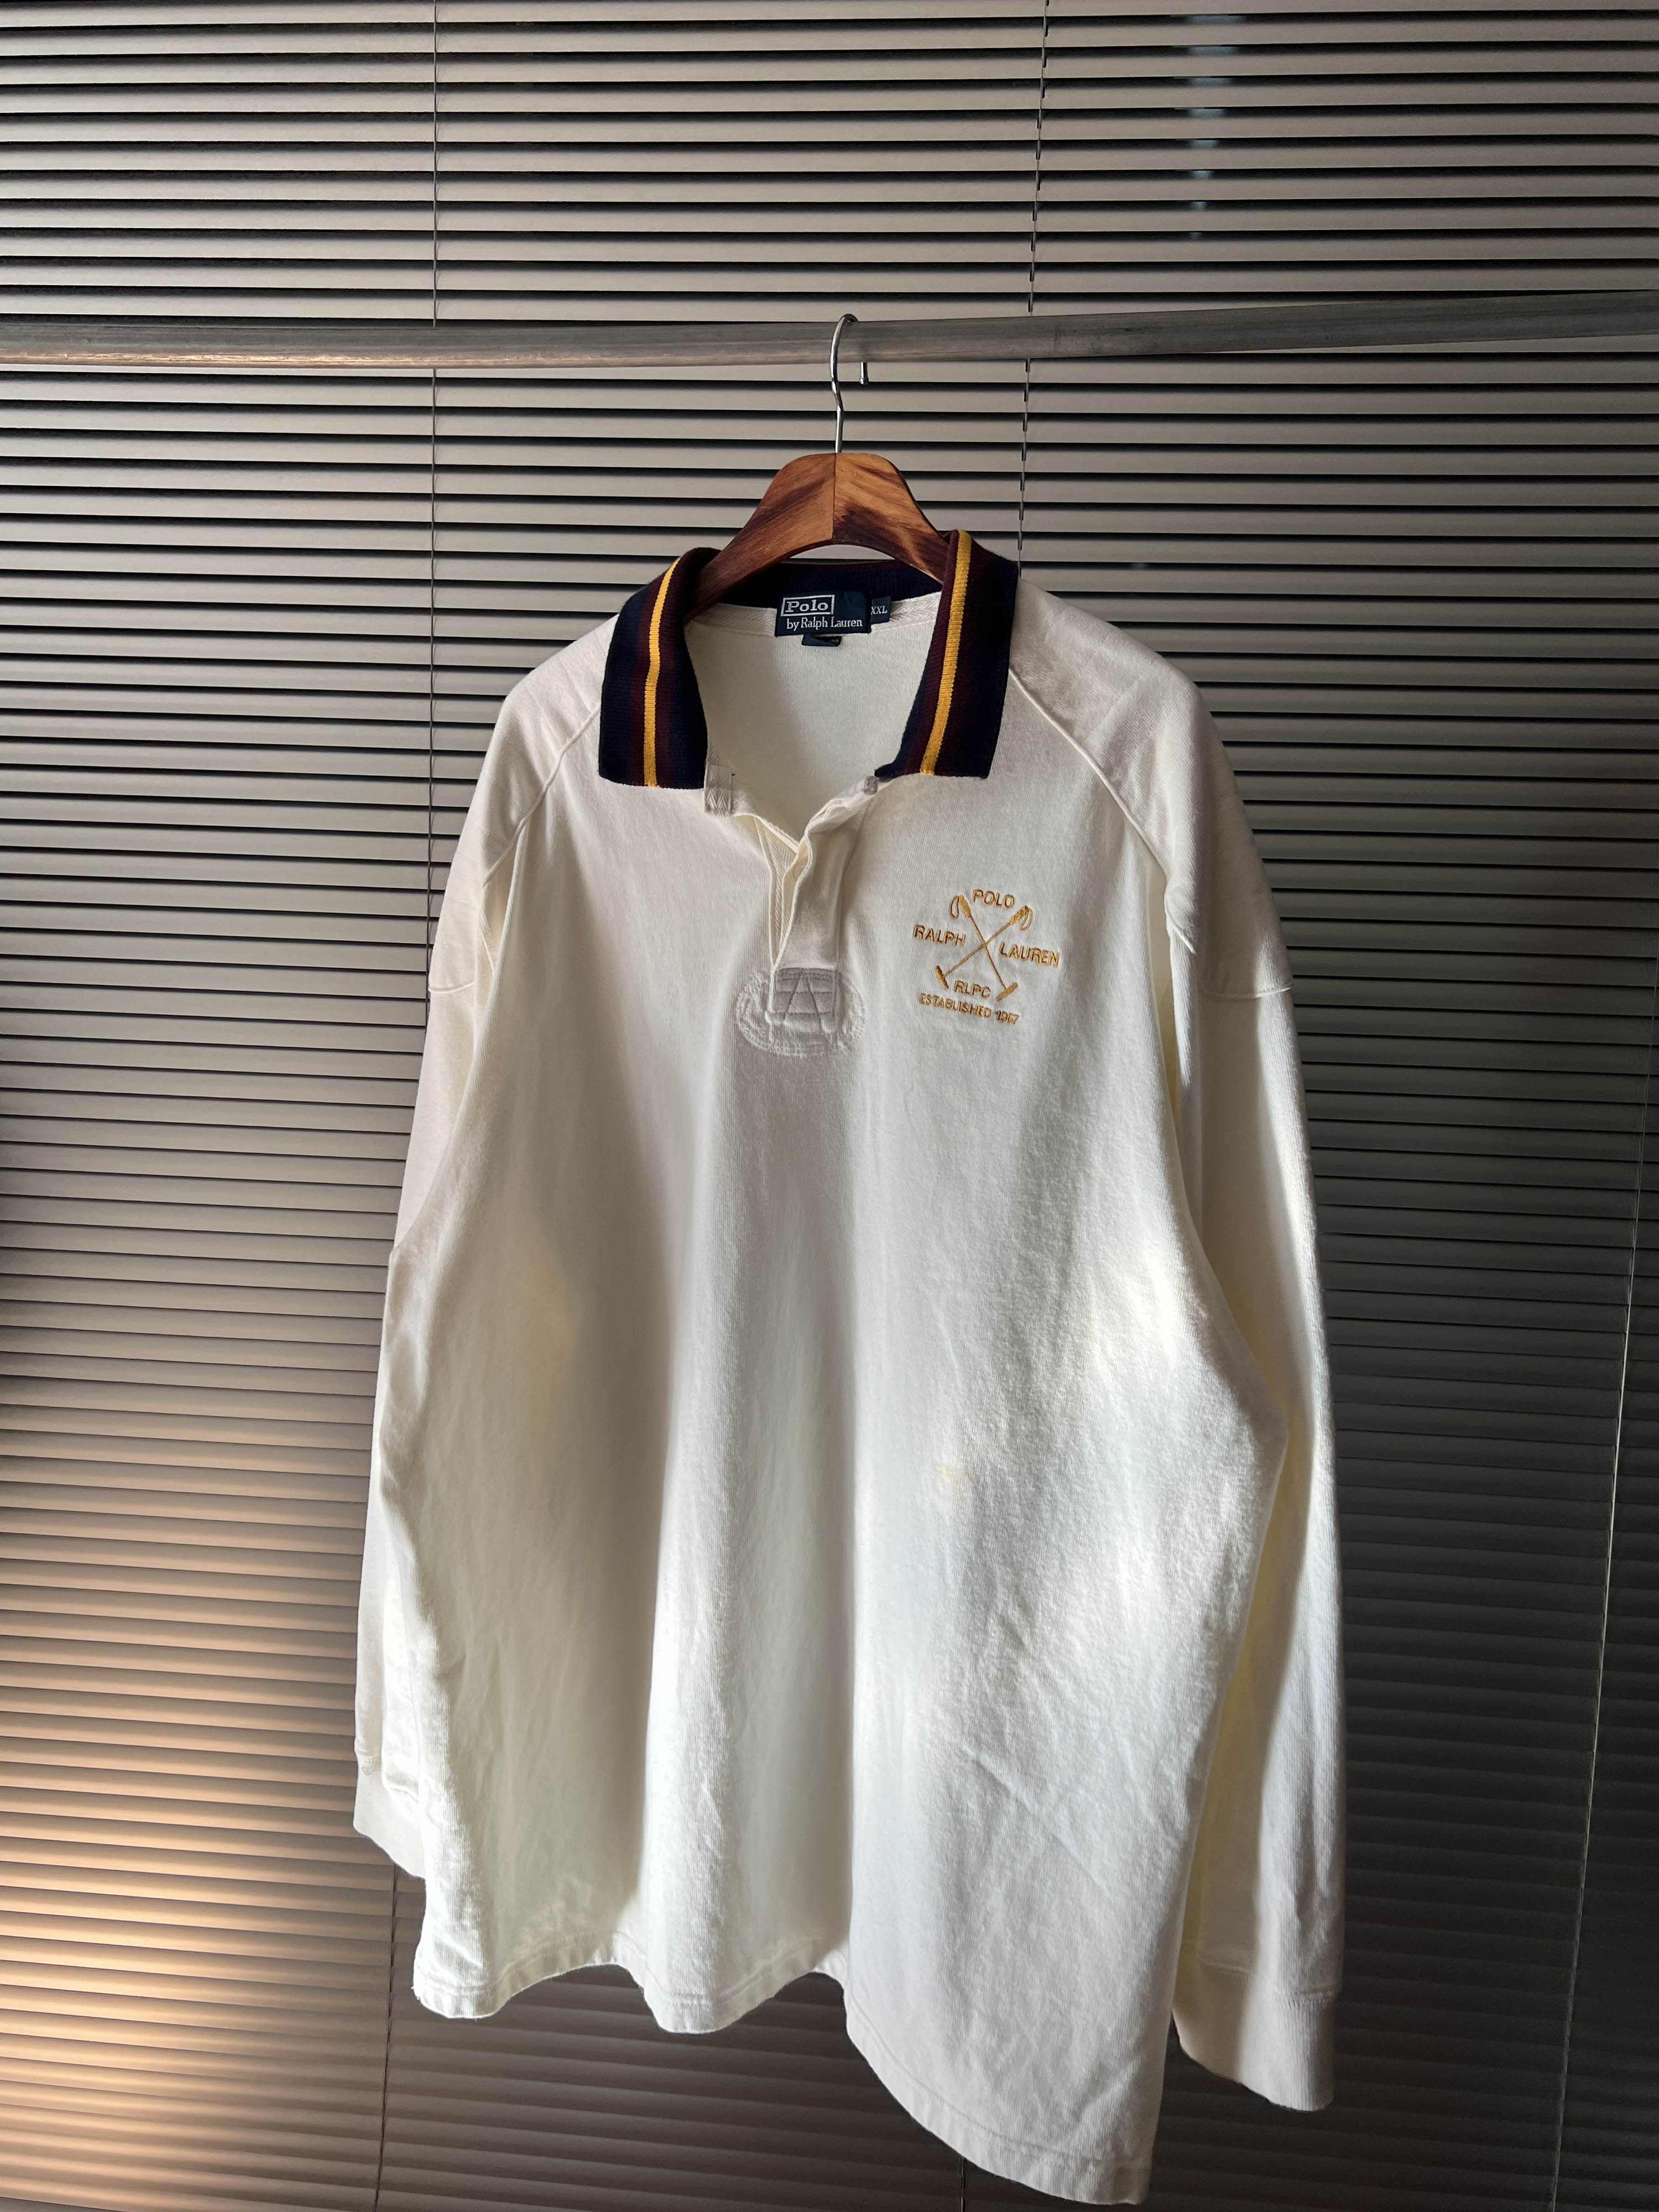 Polo ralph lauren rugby shirts